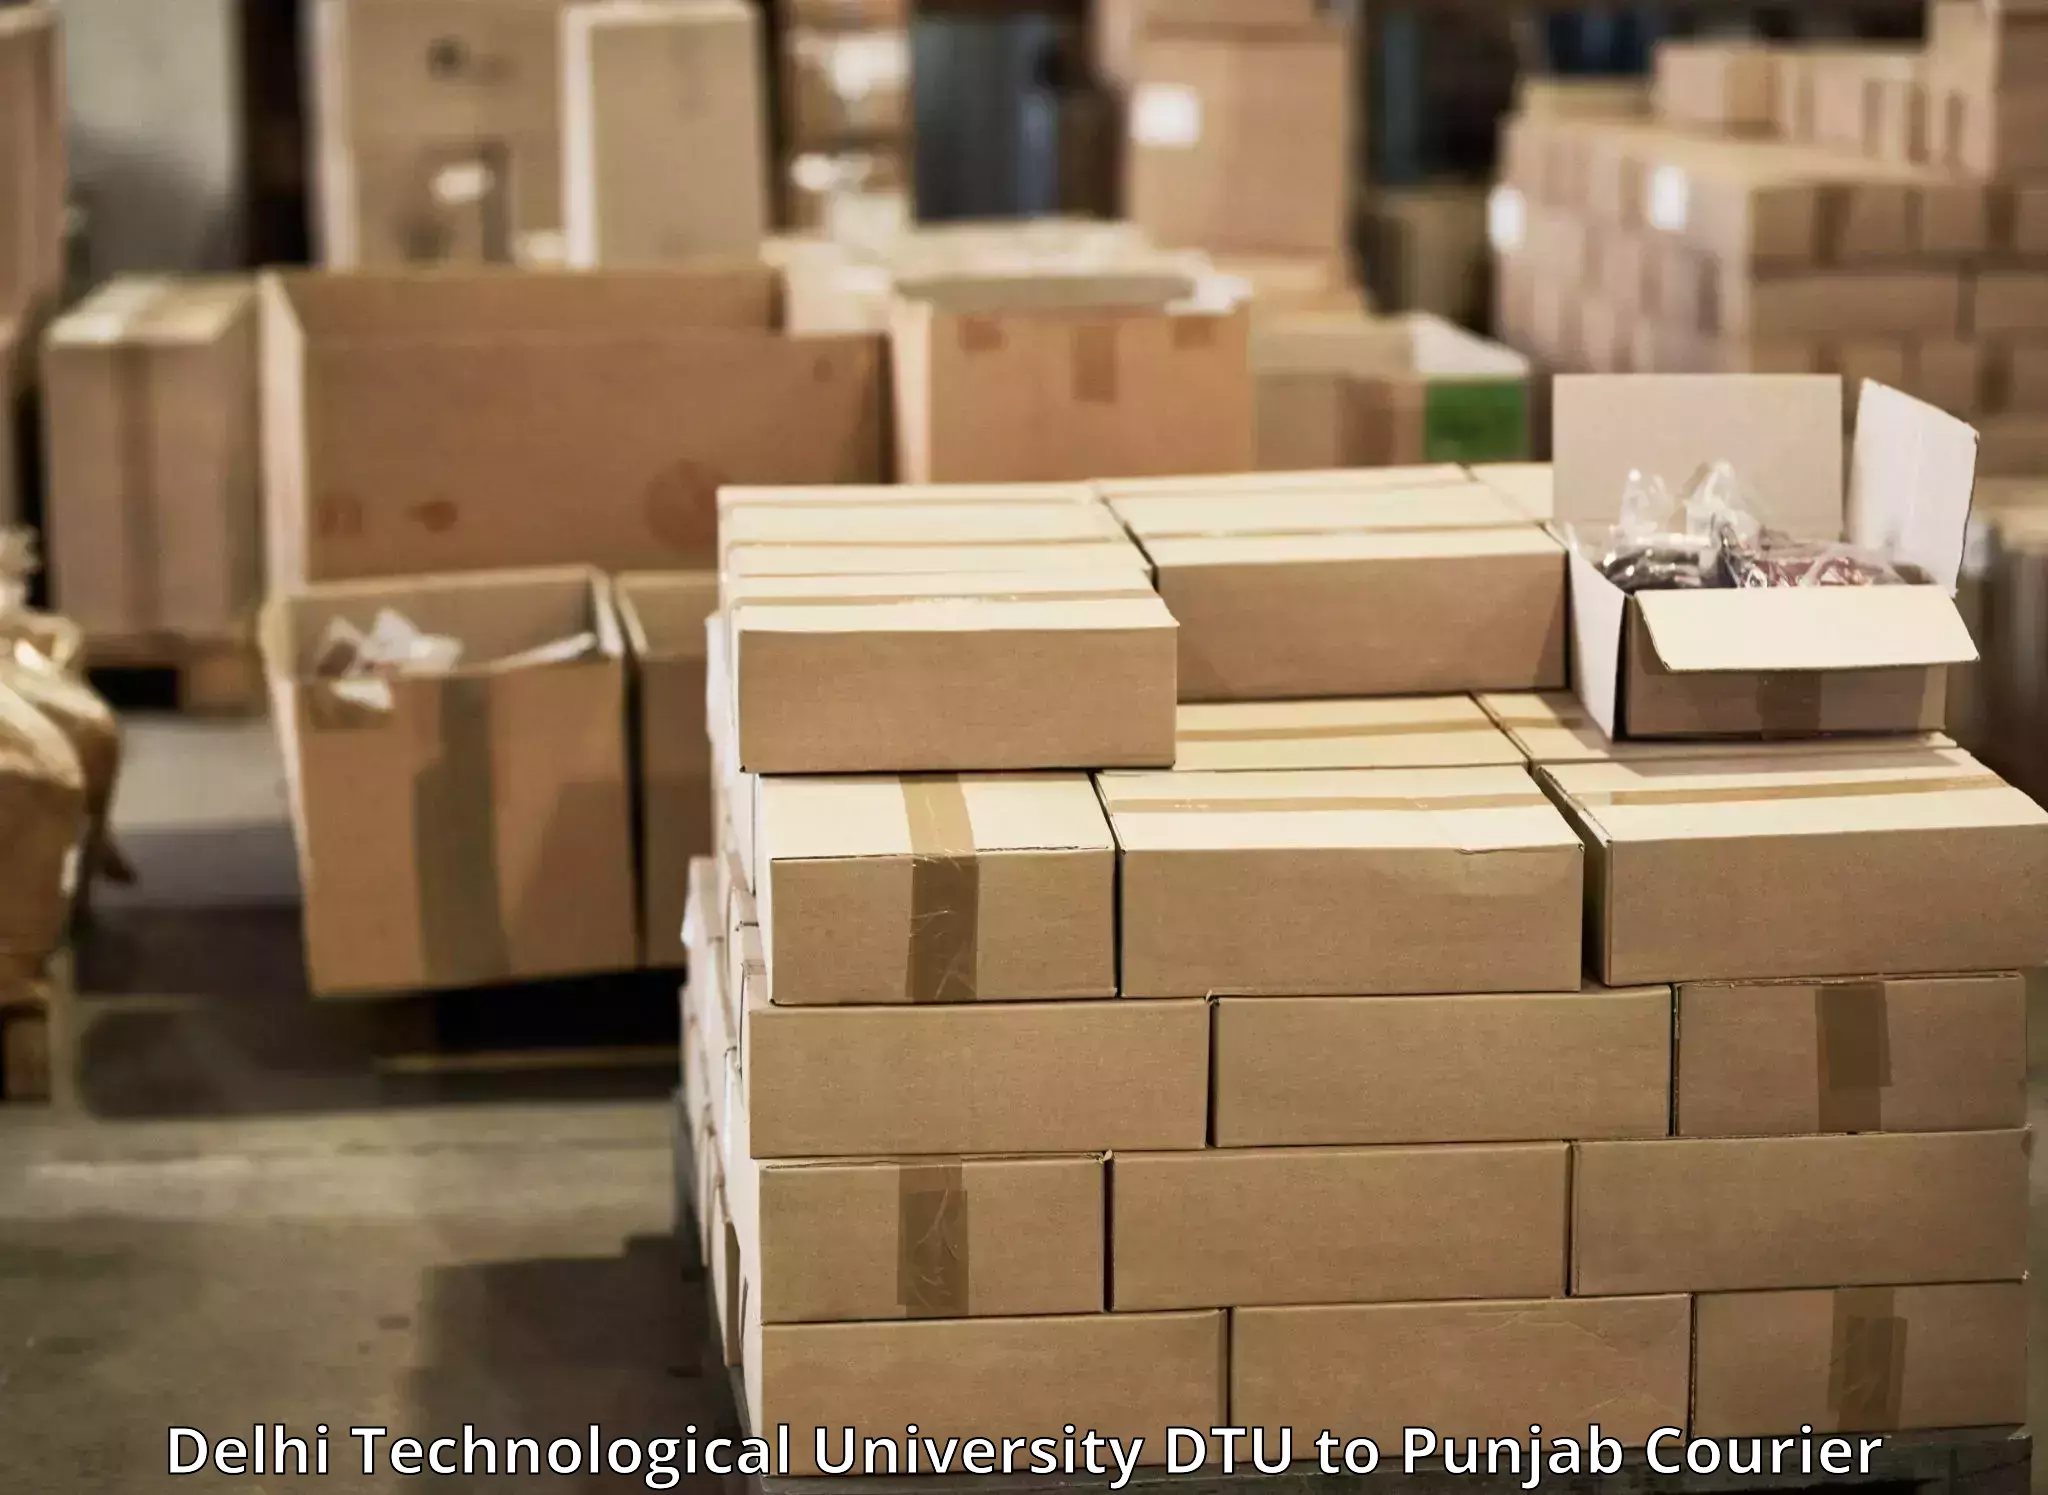 Express mail solutions Delhi Technological University DTU to Mehta Chowk